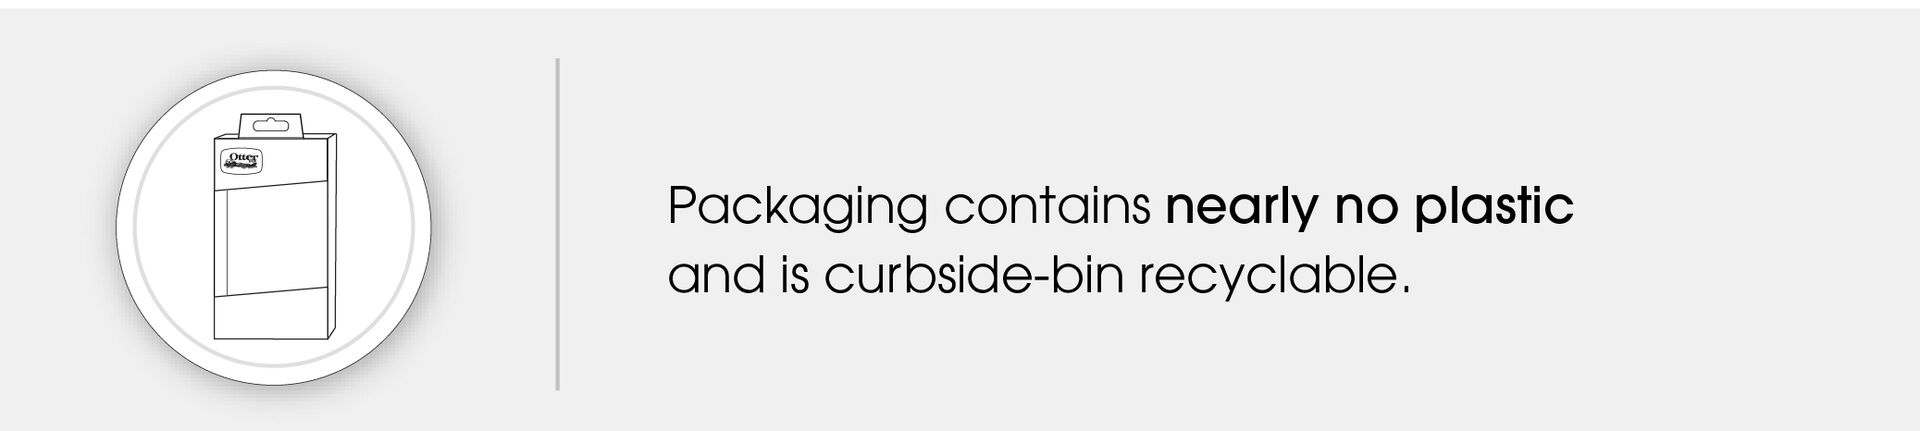 Inforgraphic that states OtterBox Packaging contains nearly no plastic and is curbside-bin recyclable.